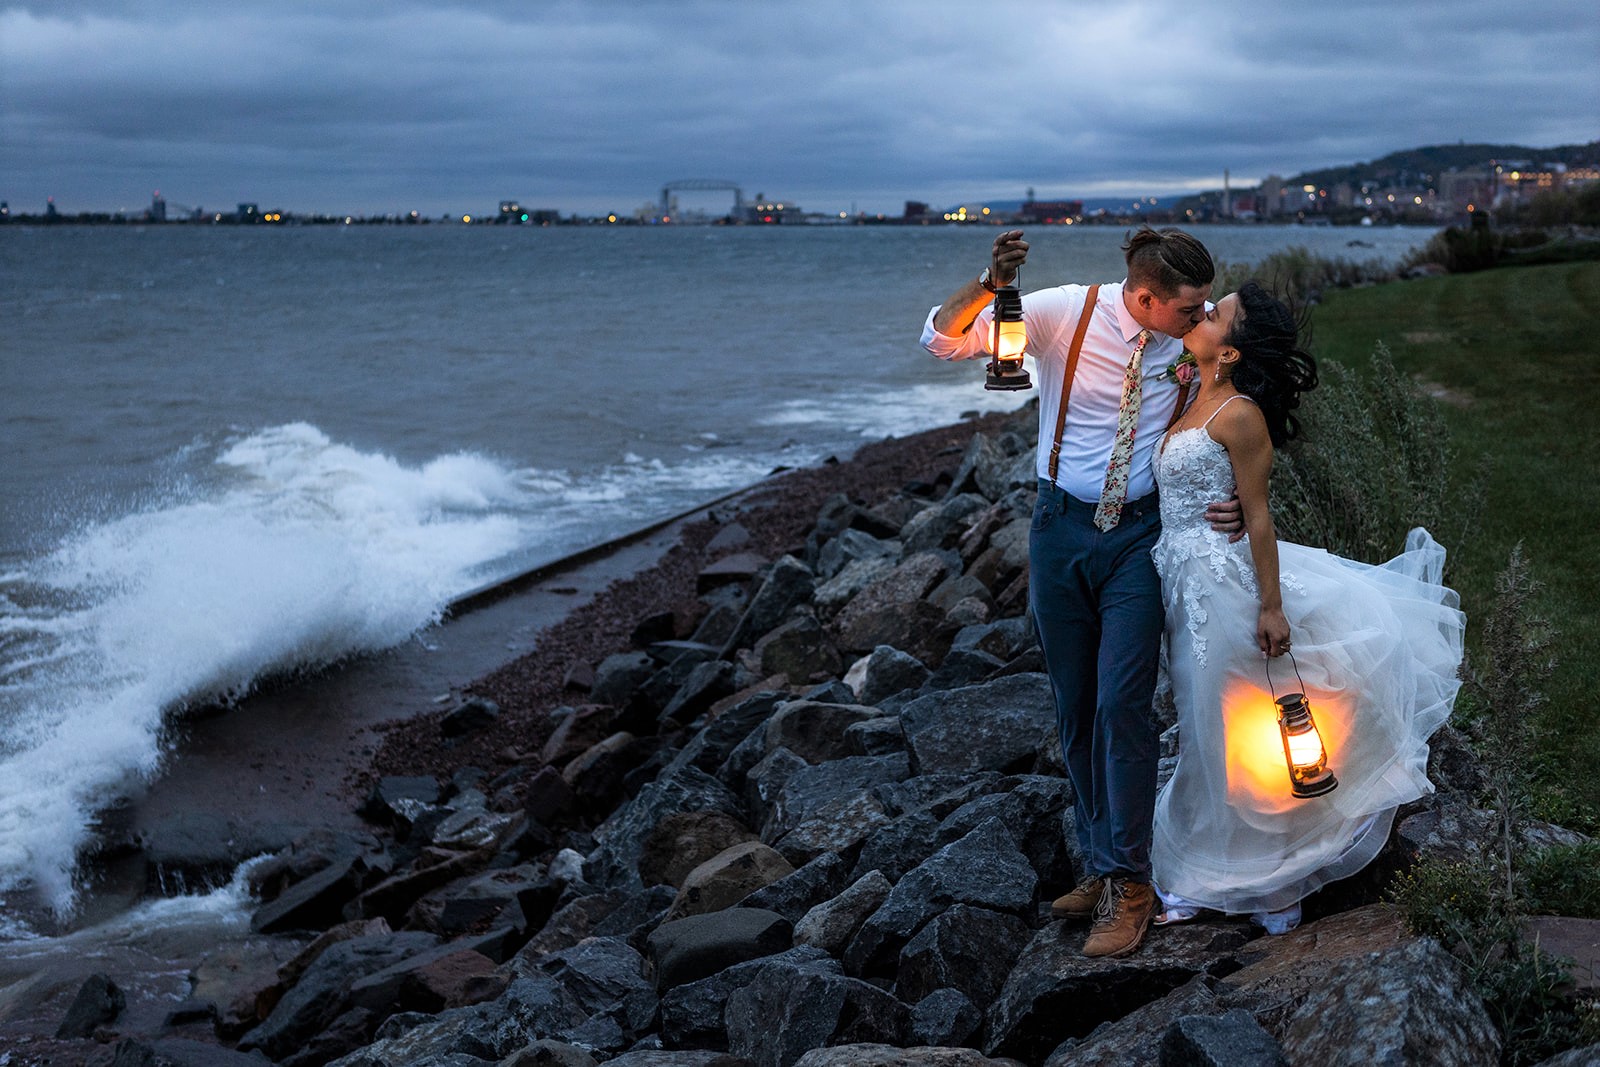 A couple kiss on the shore of Lake Superior in Duluth, MN as the waves crash along the rocks. With comfortable temperatures and beautiful scenery, fall is one of the best times to elope in Minnesota!